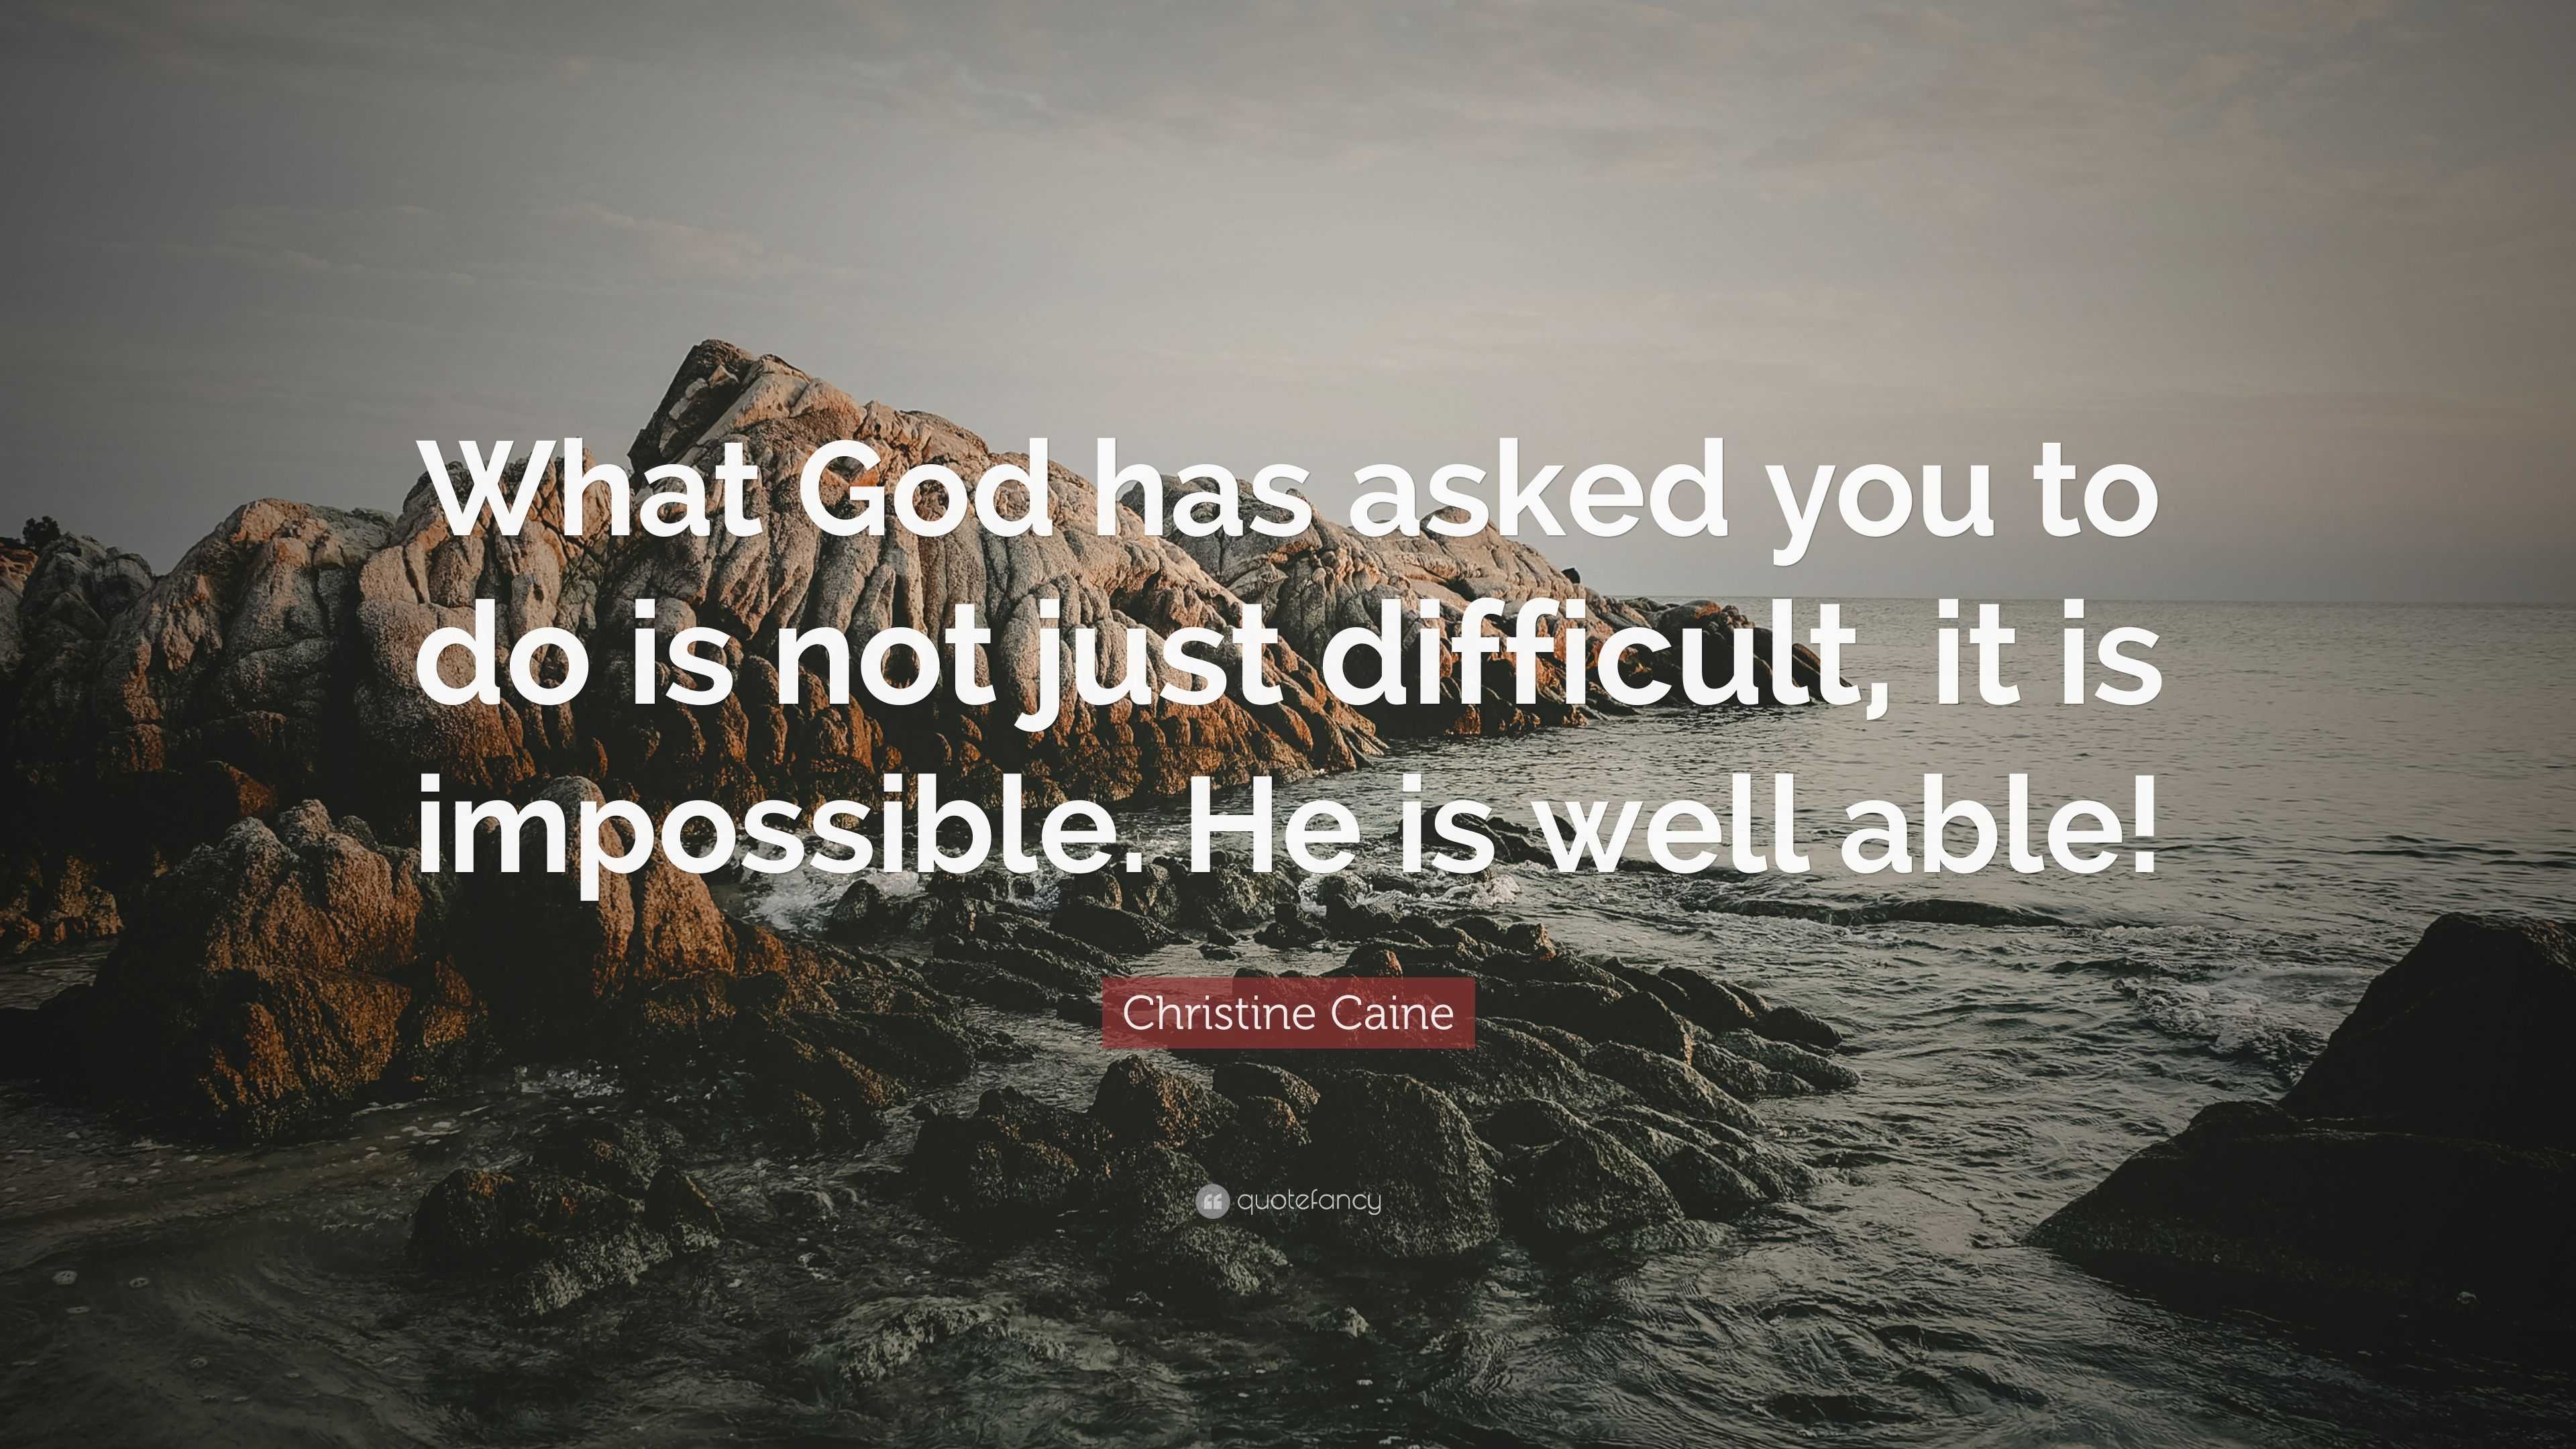 Christine Caine Quote: “What God has asked you to do is not just ...